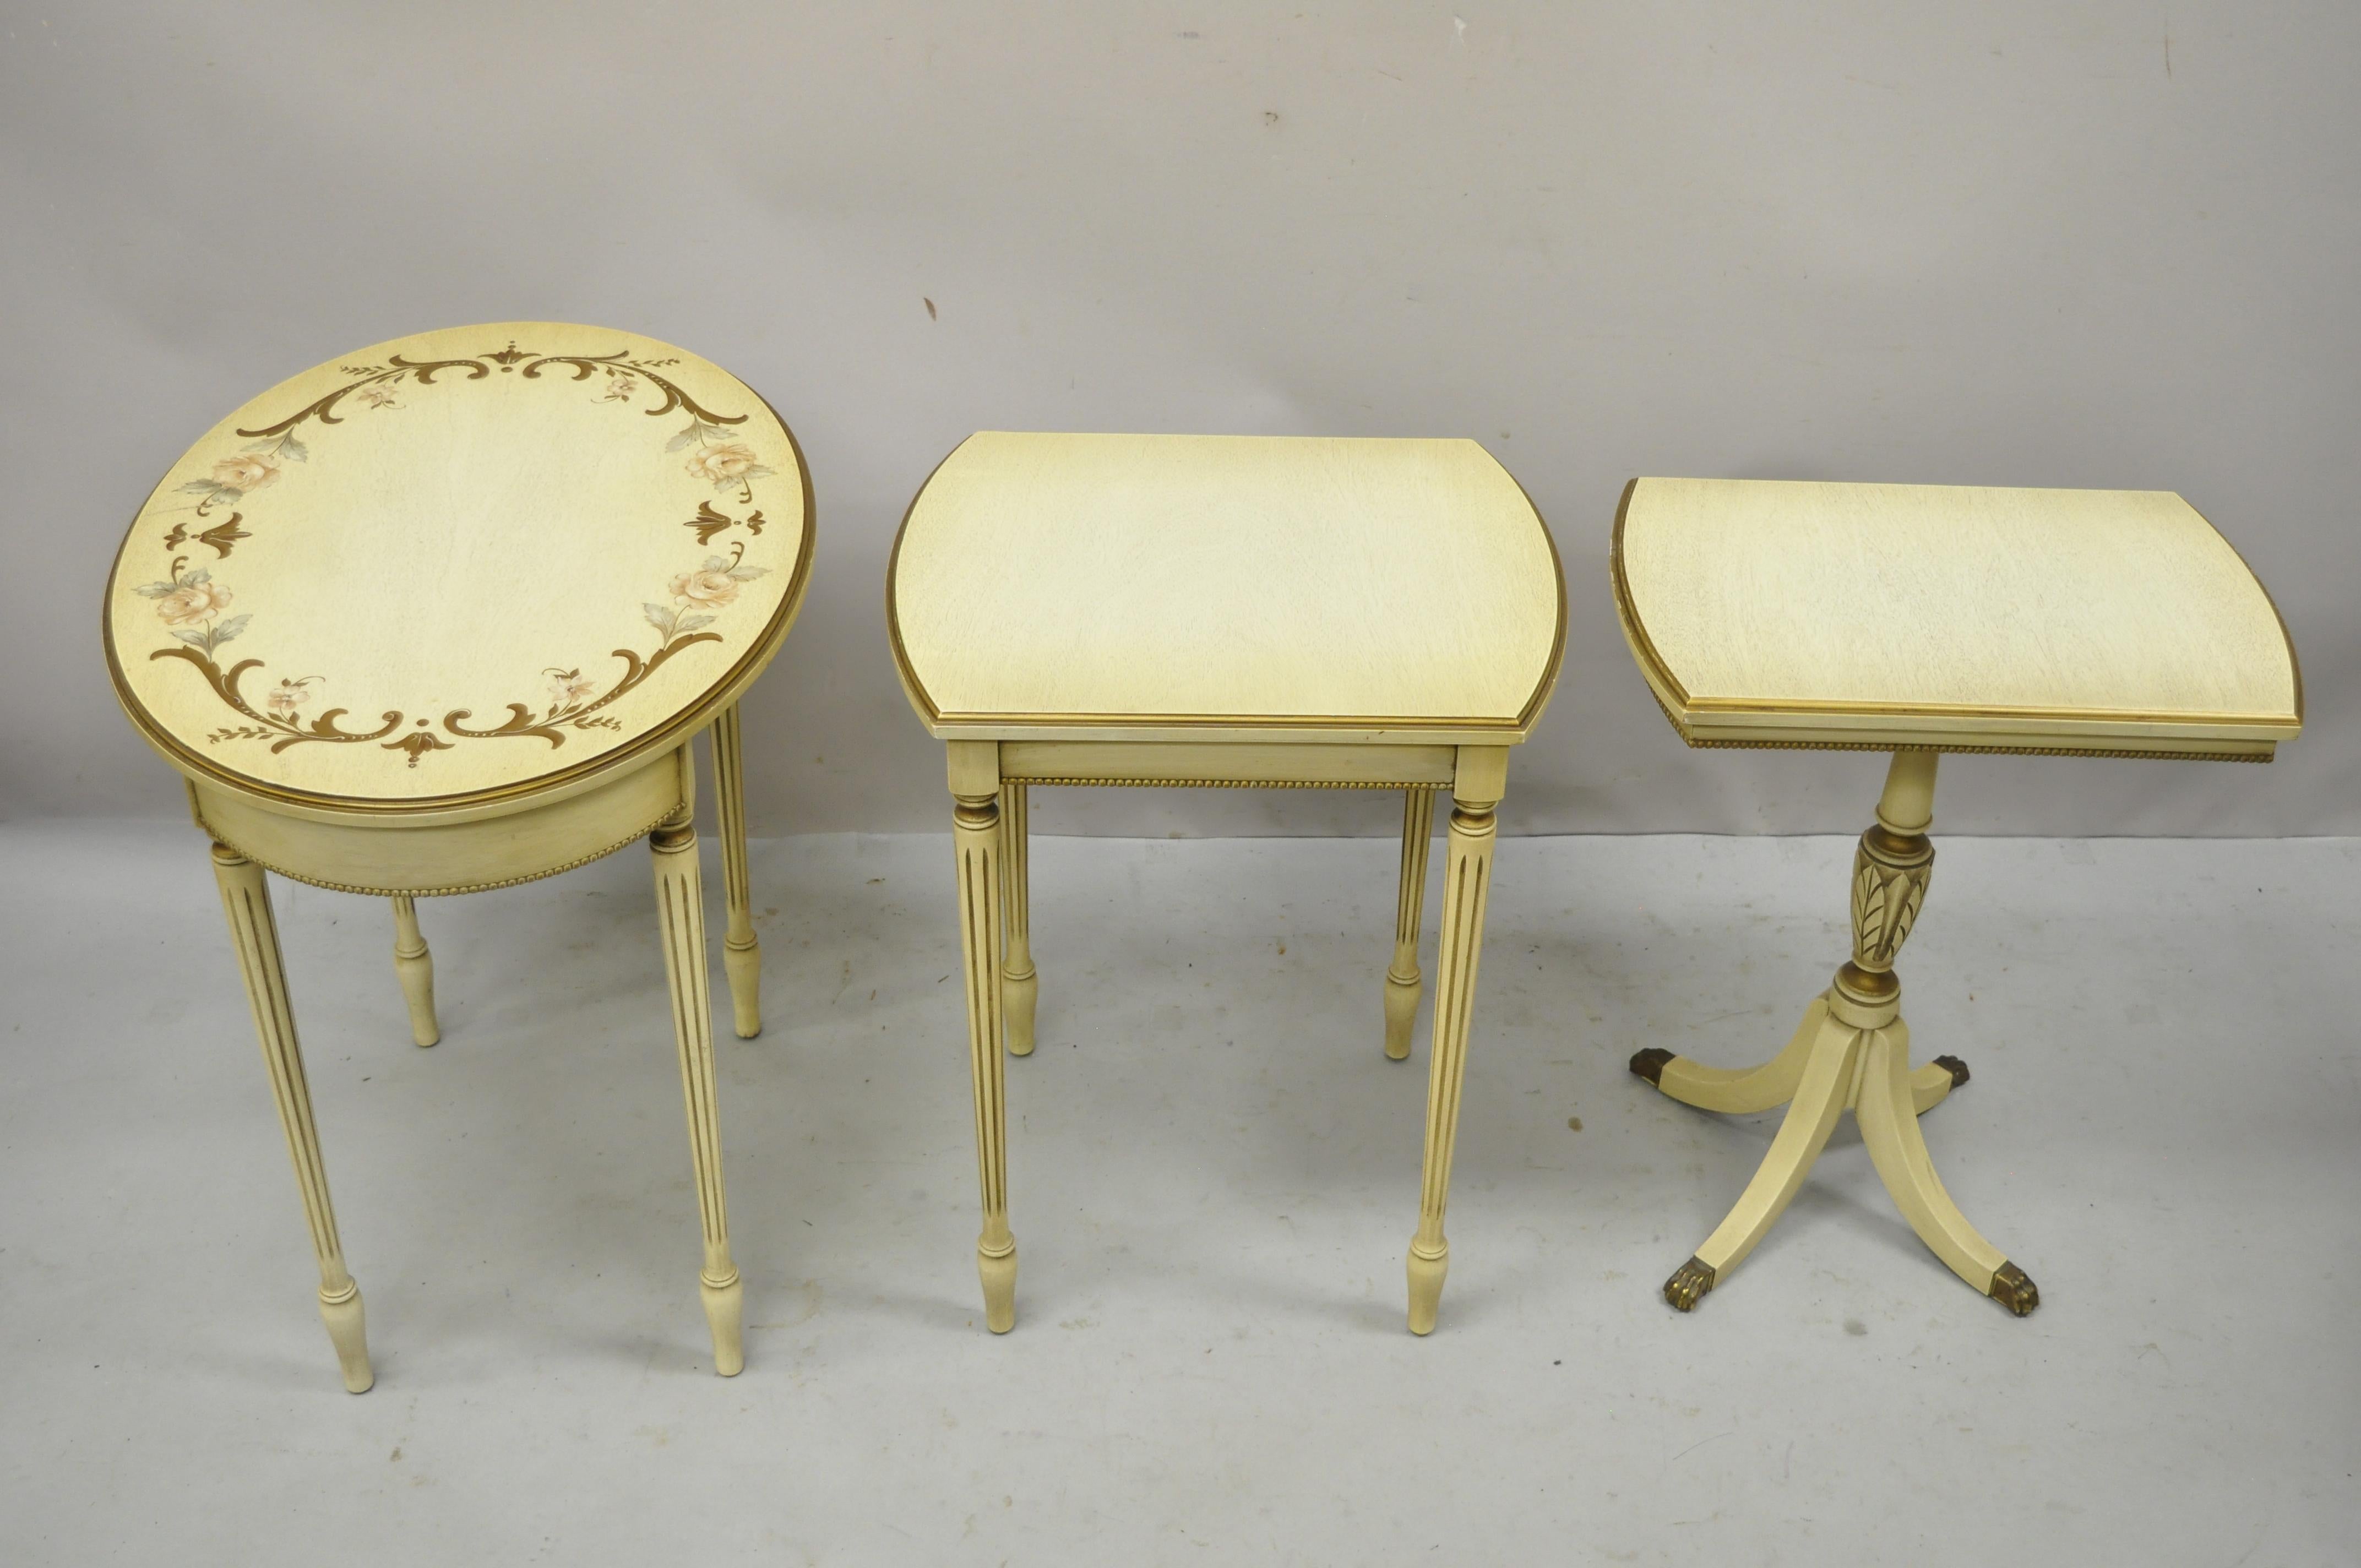 North American Antique Cream Painted French Nesting Side Table Imperial Grand Rapids, Set of 3